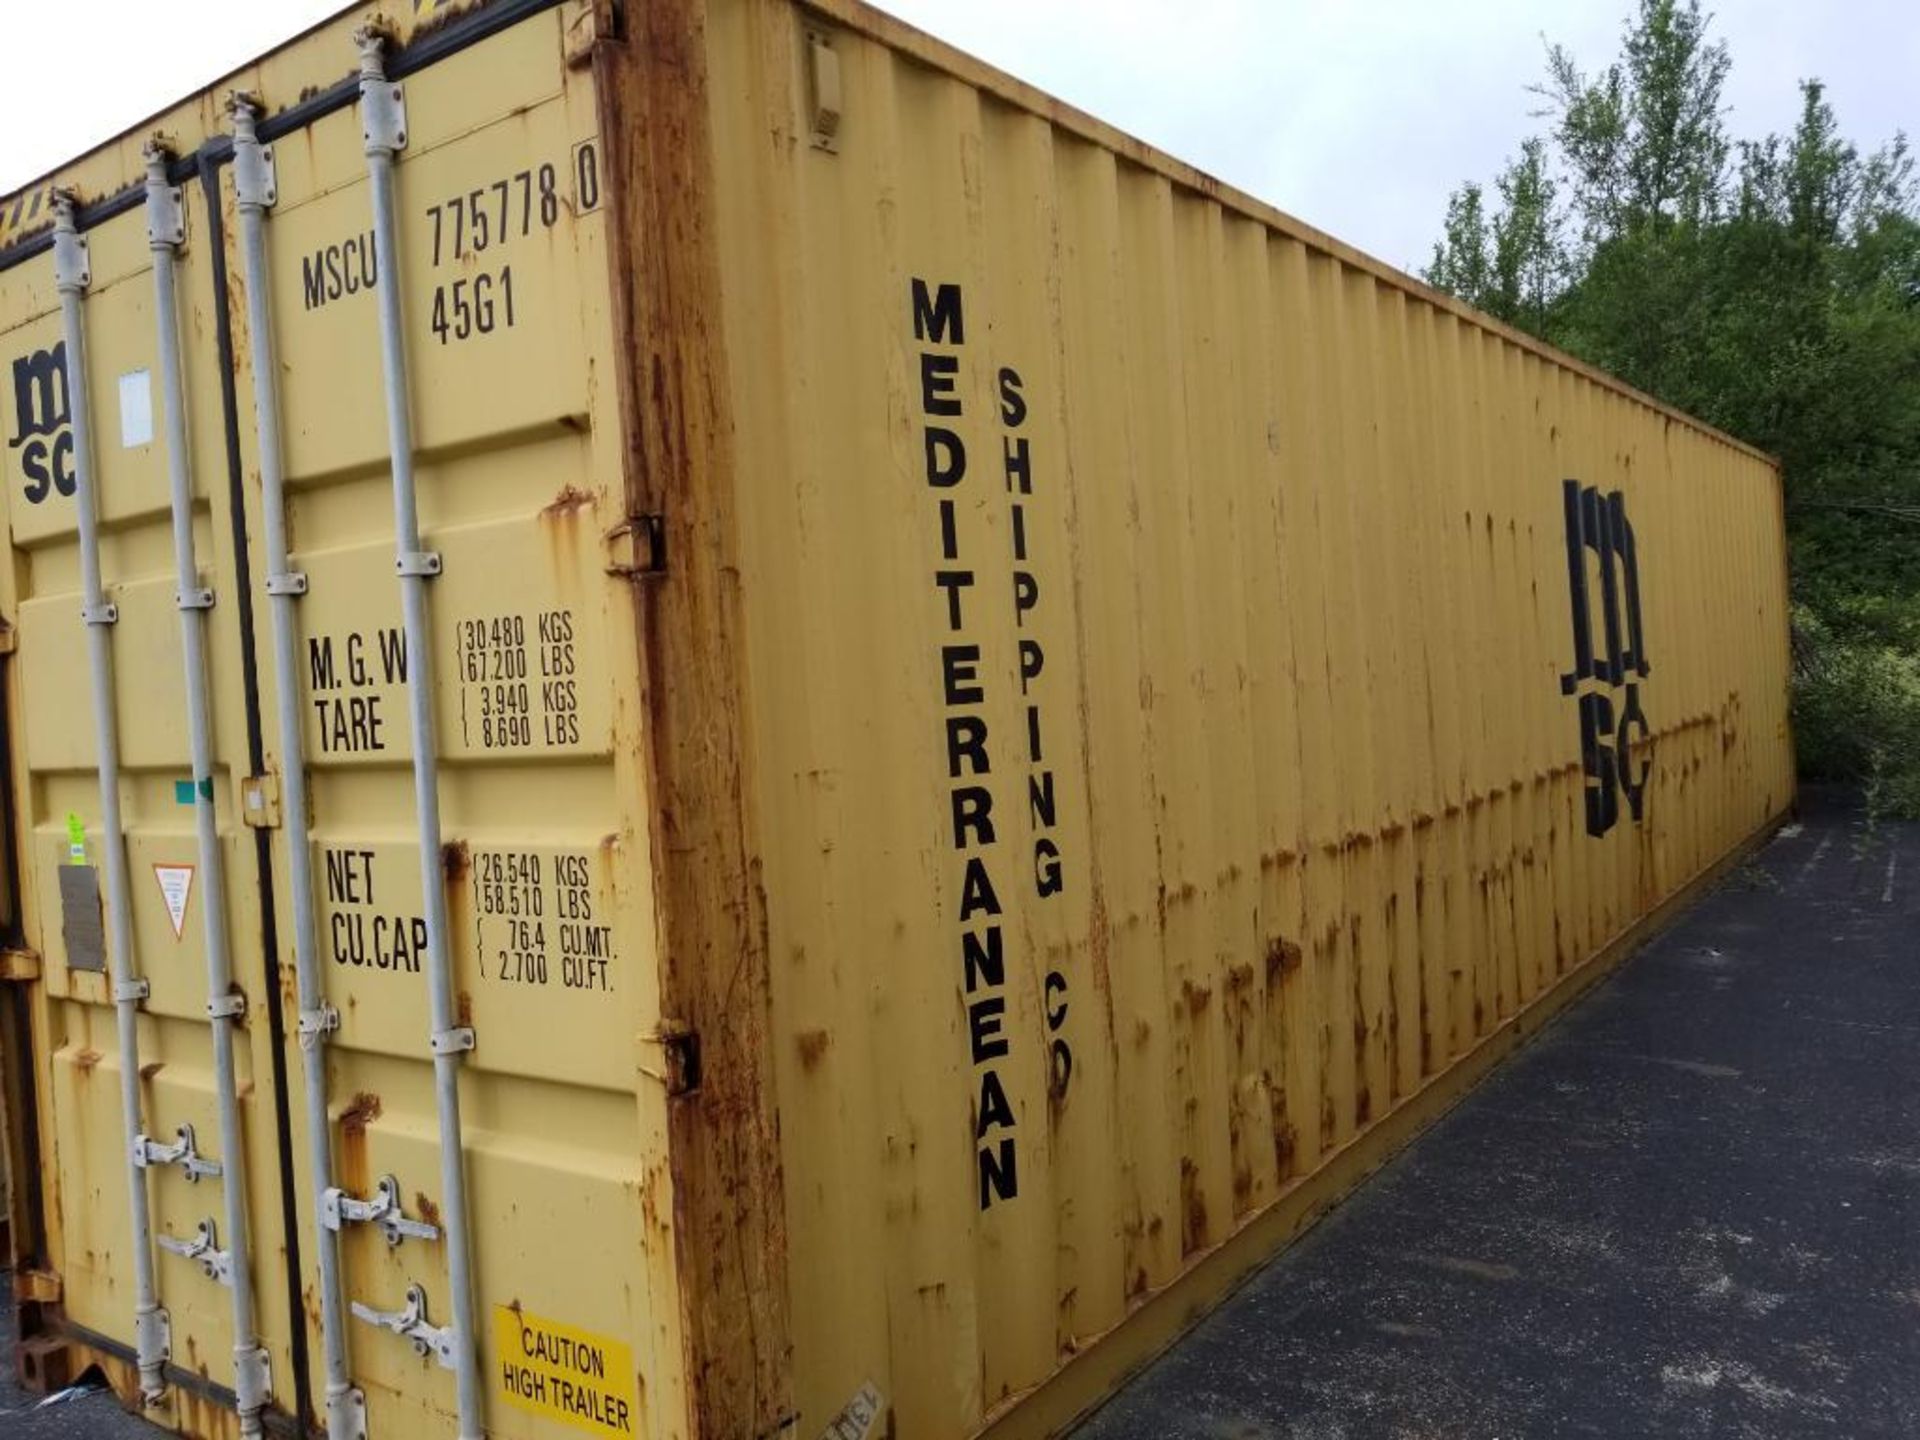 2006 Storage container. 40ft length. 9ft 6in tall. Type NL40H-181A. Max gross weight 67,200lbs.